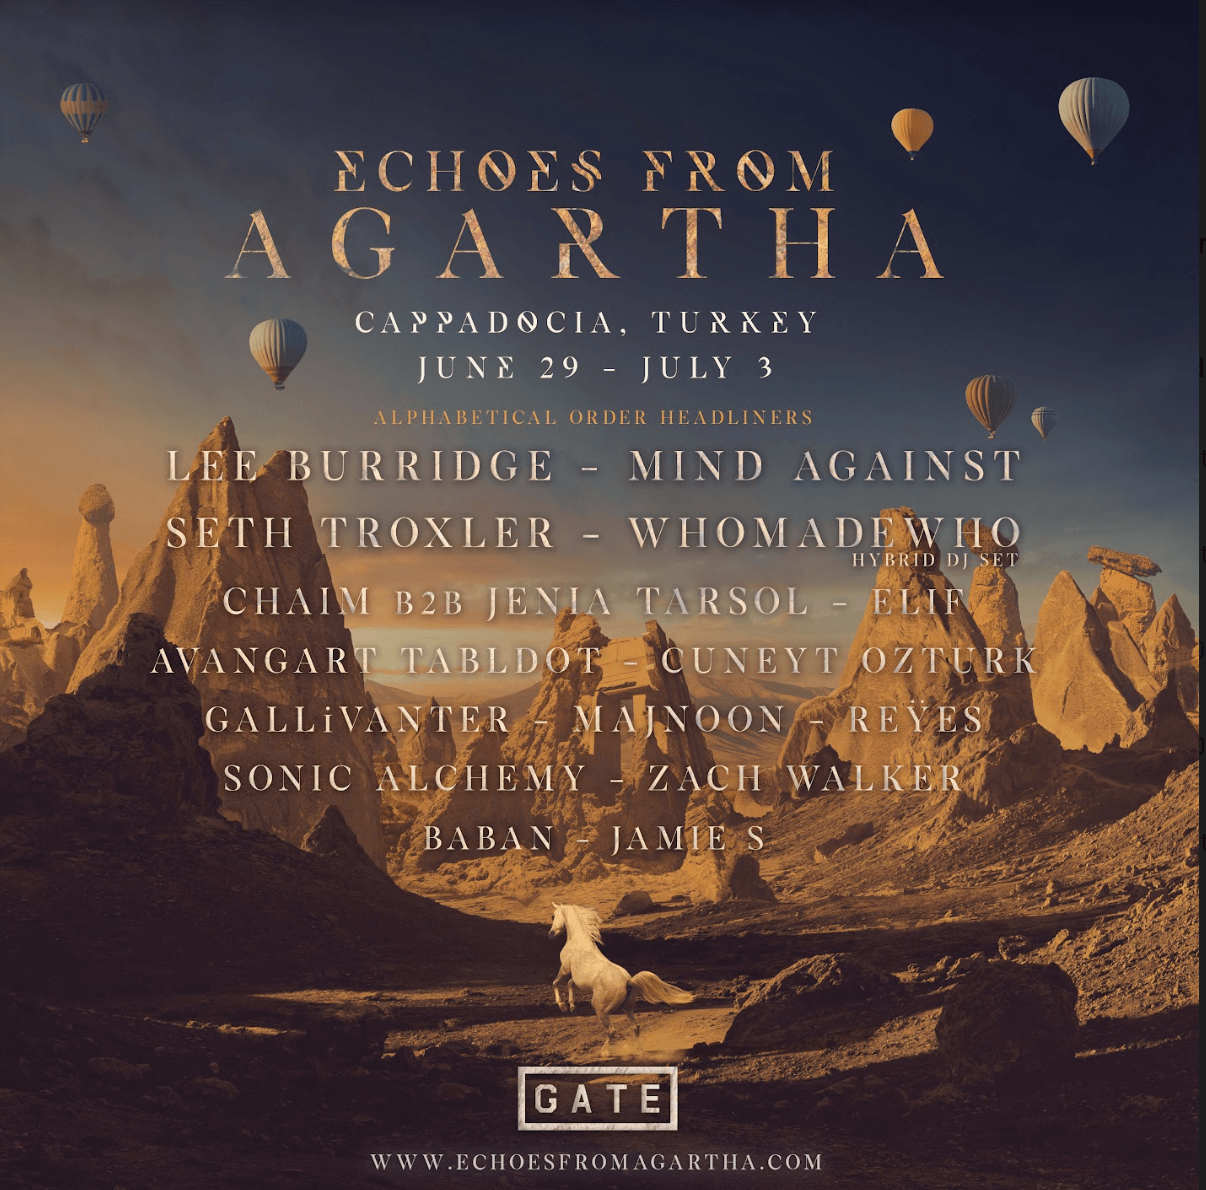 Echoes from Agartha Festival is taking place in Turkey this summer!